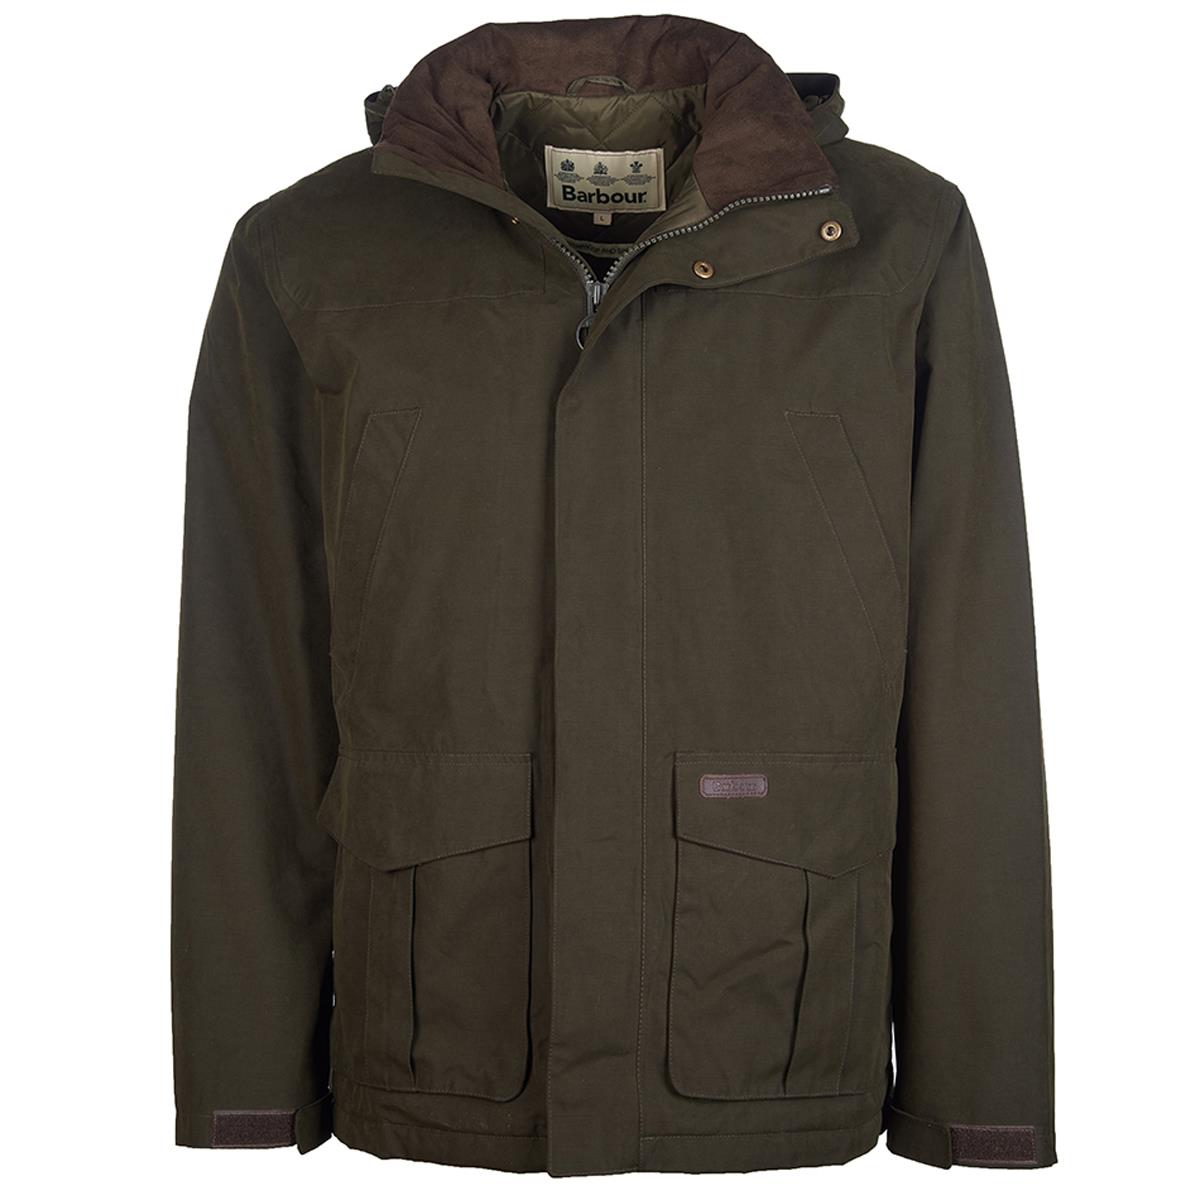 What is the PM number for the Barbour Brockstone Jacket?